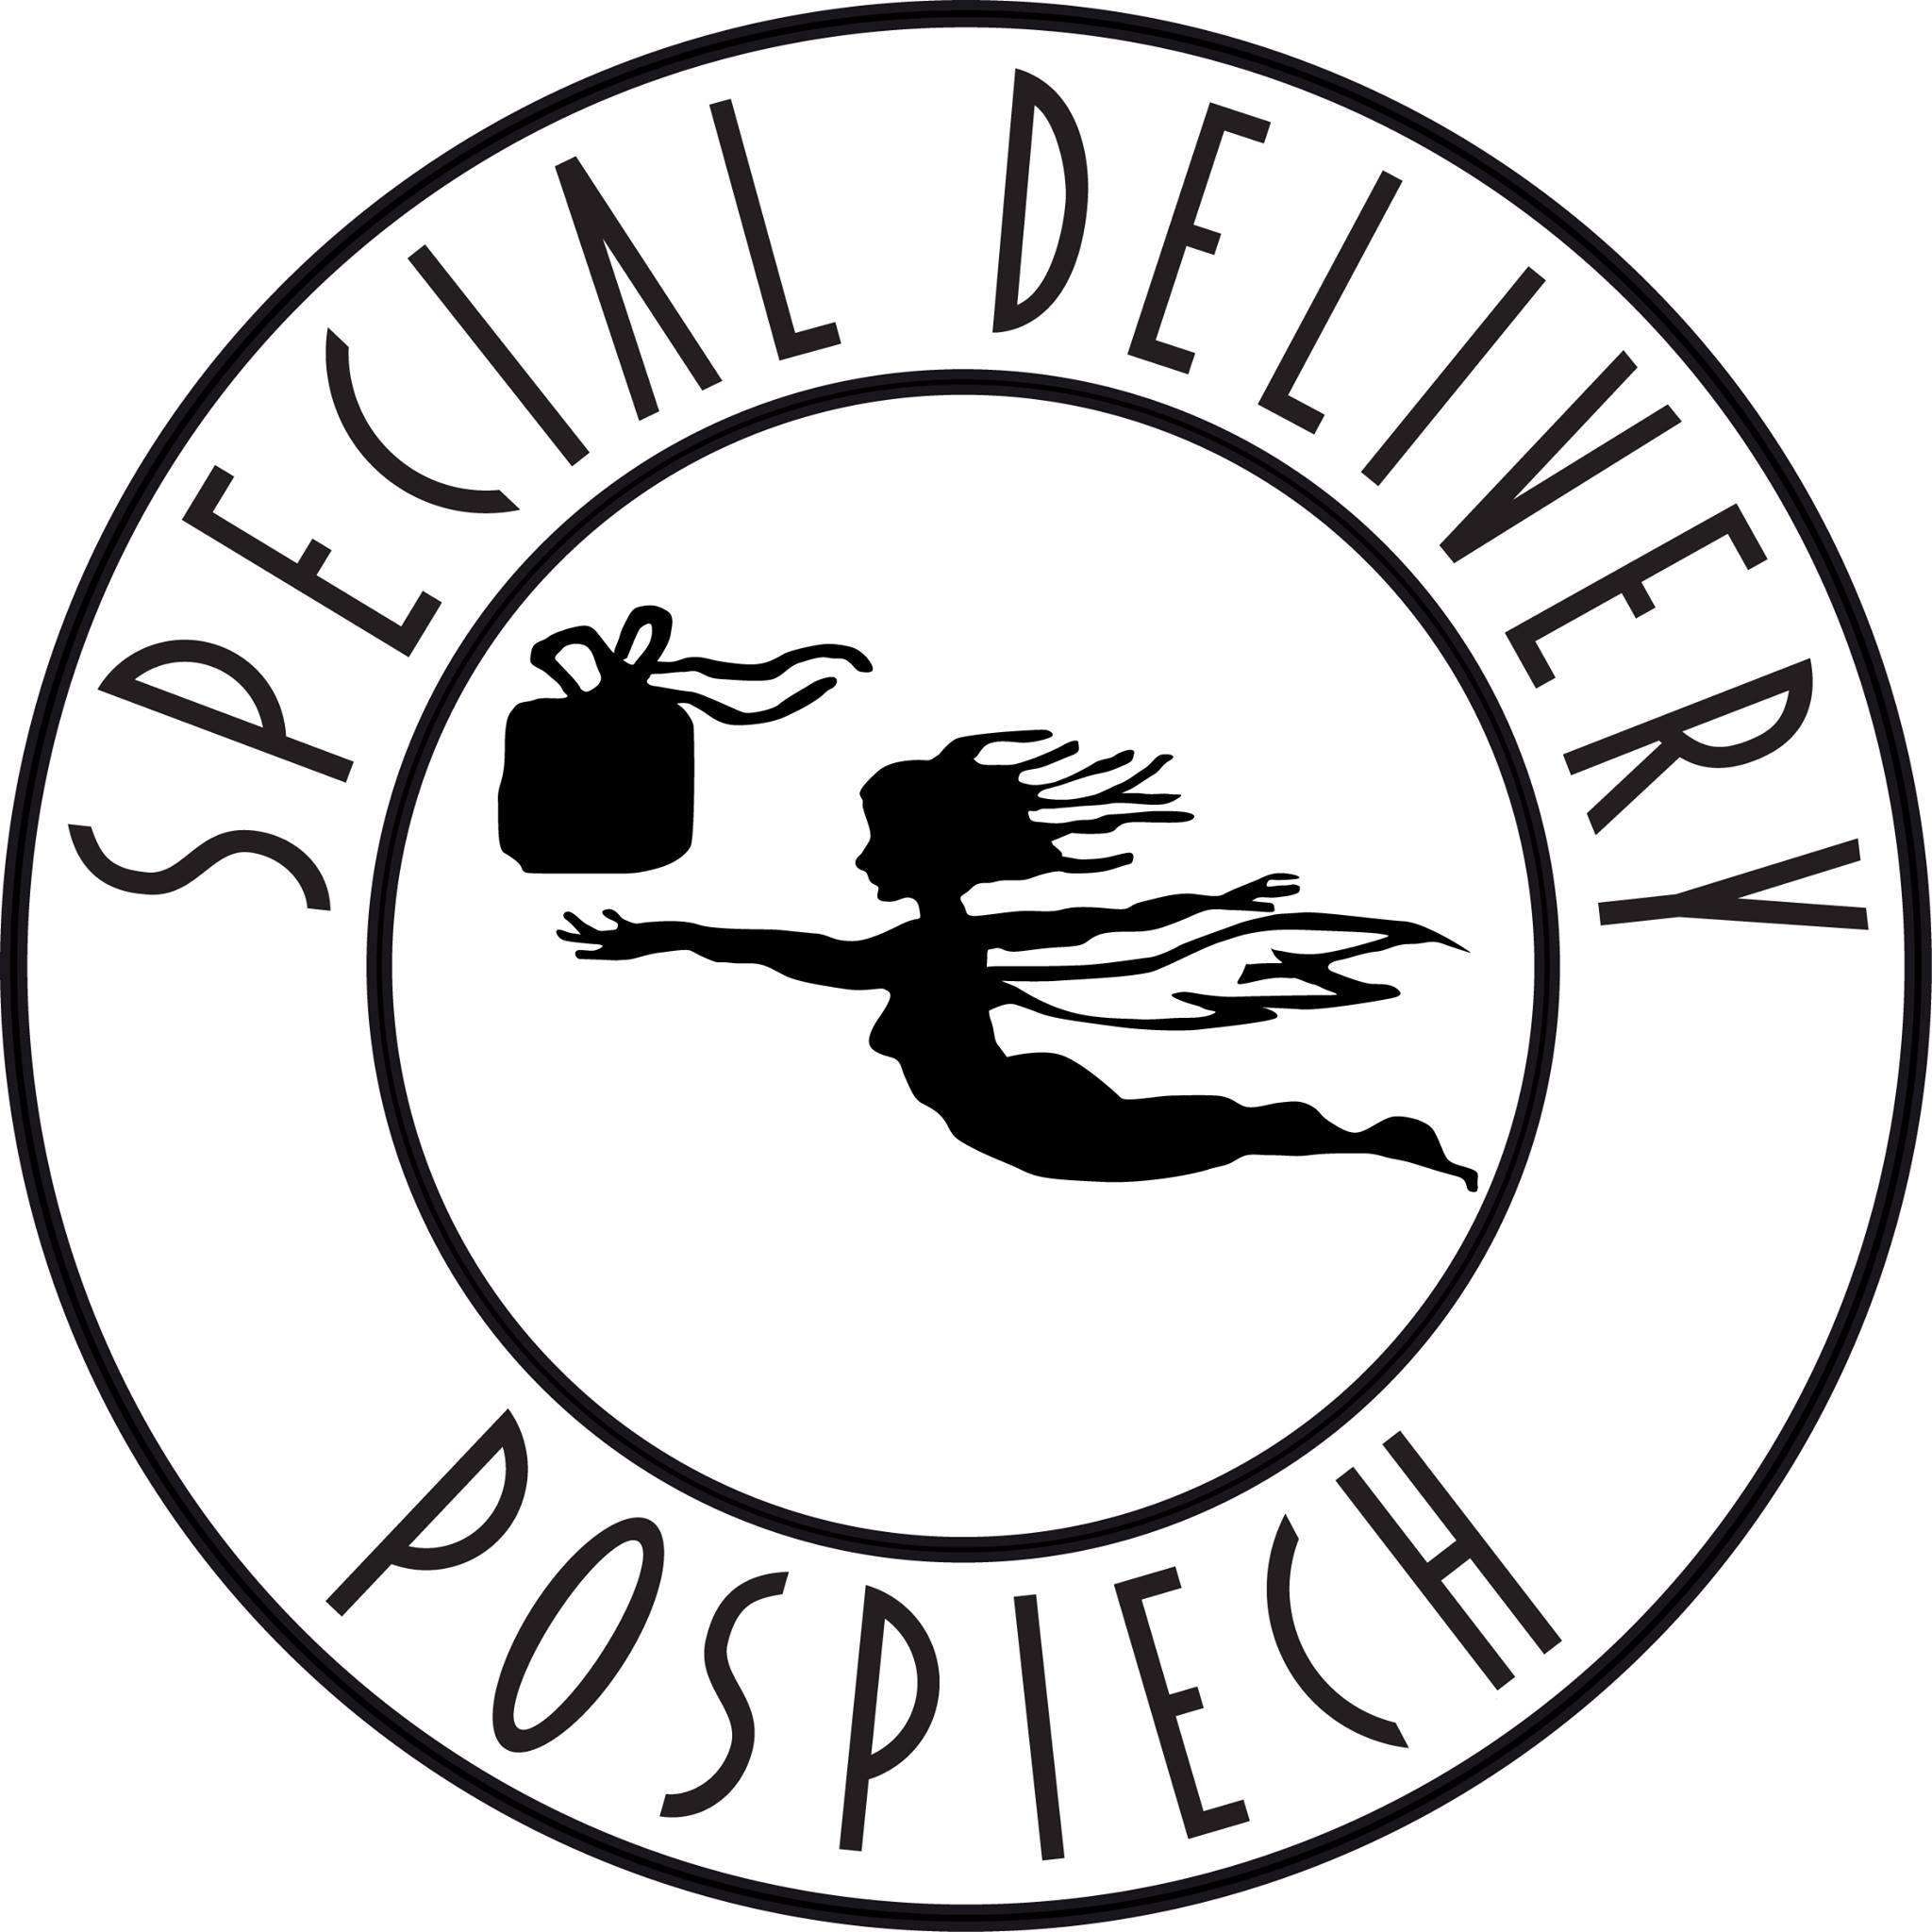 Popiech delivery